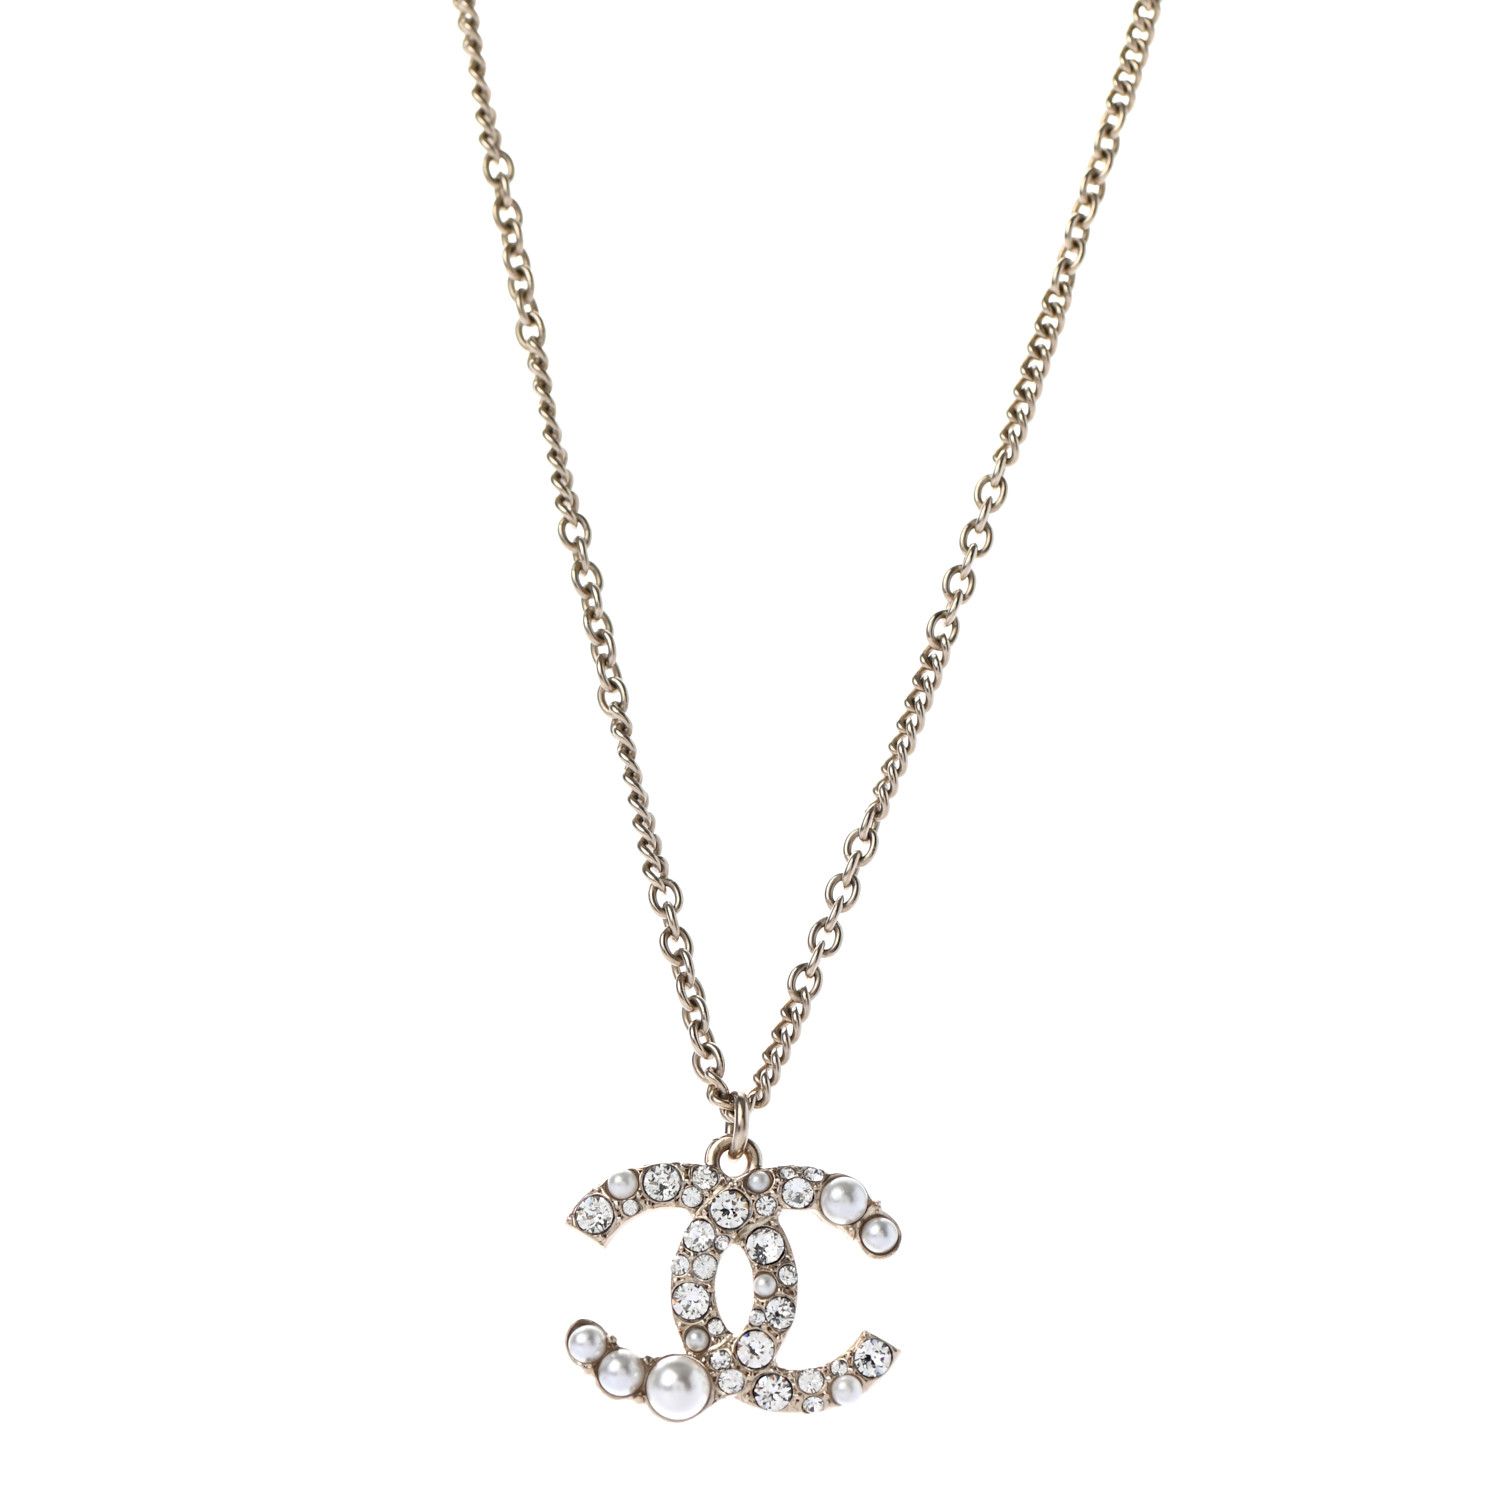 CHANEL

Pearl Crystal CC Pendant Necklace Gold | Fashionphile